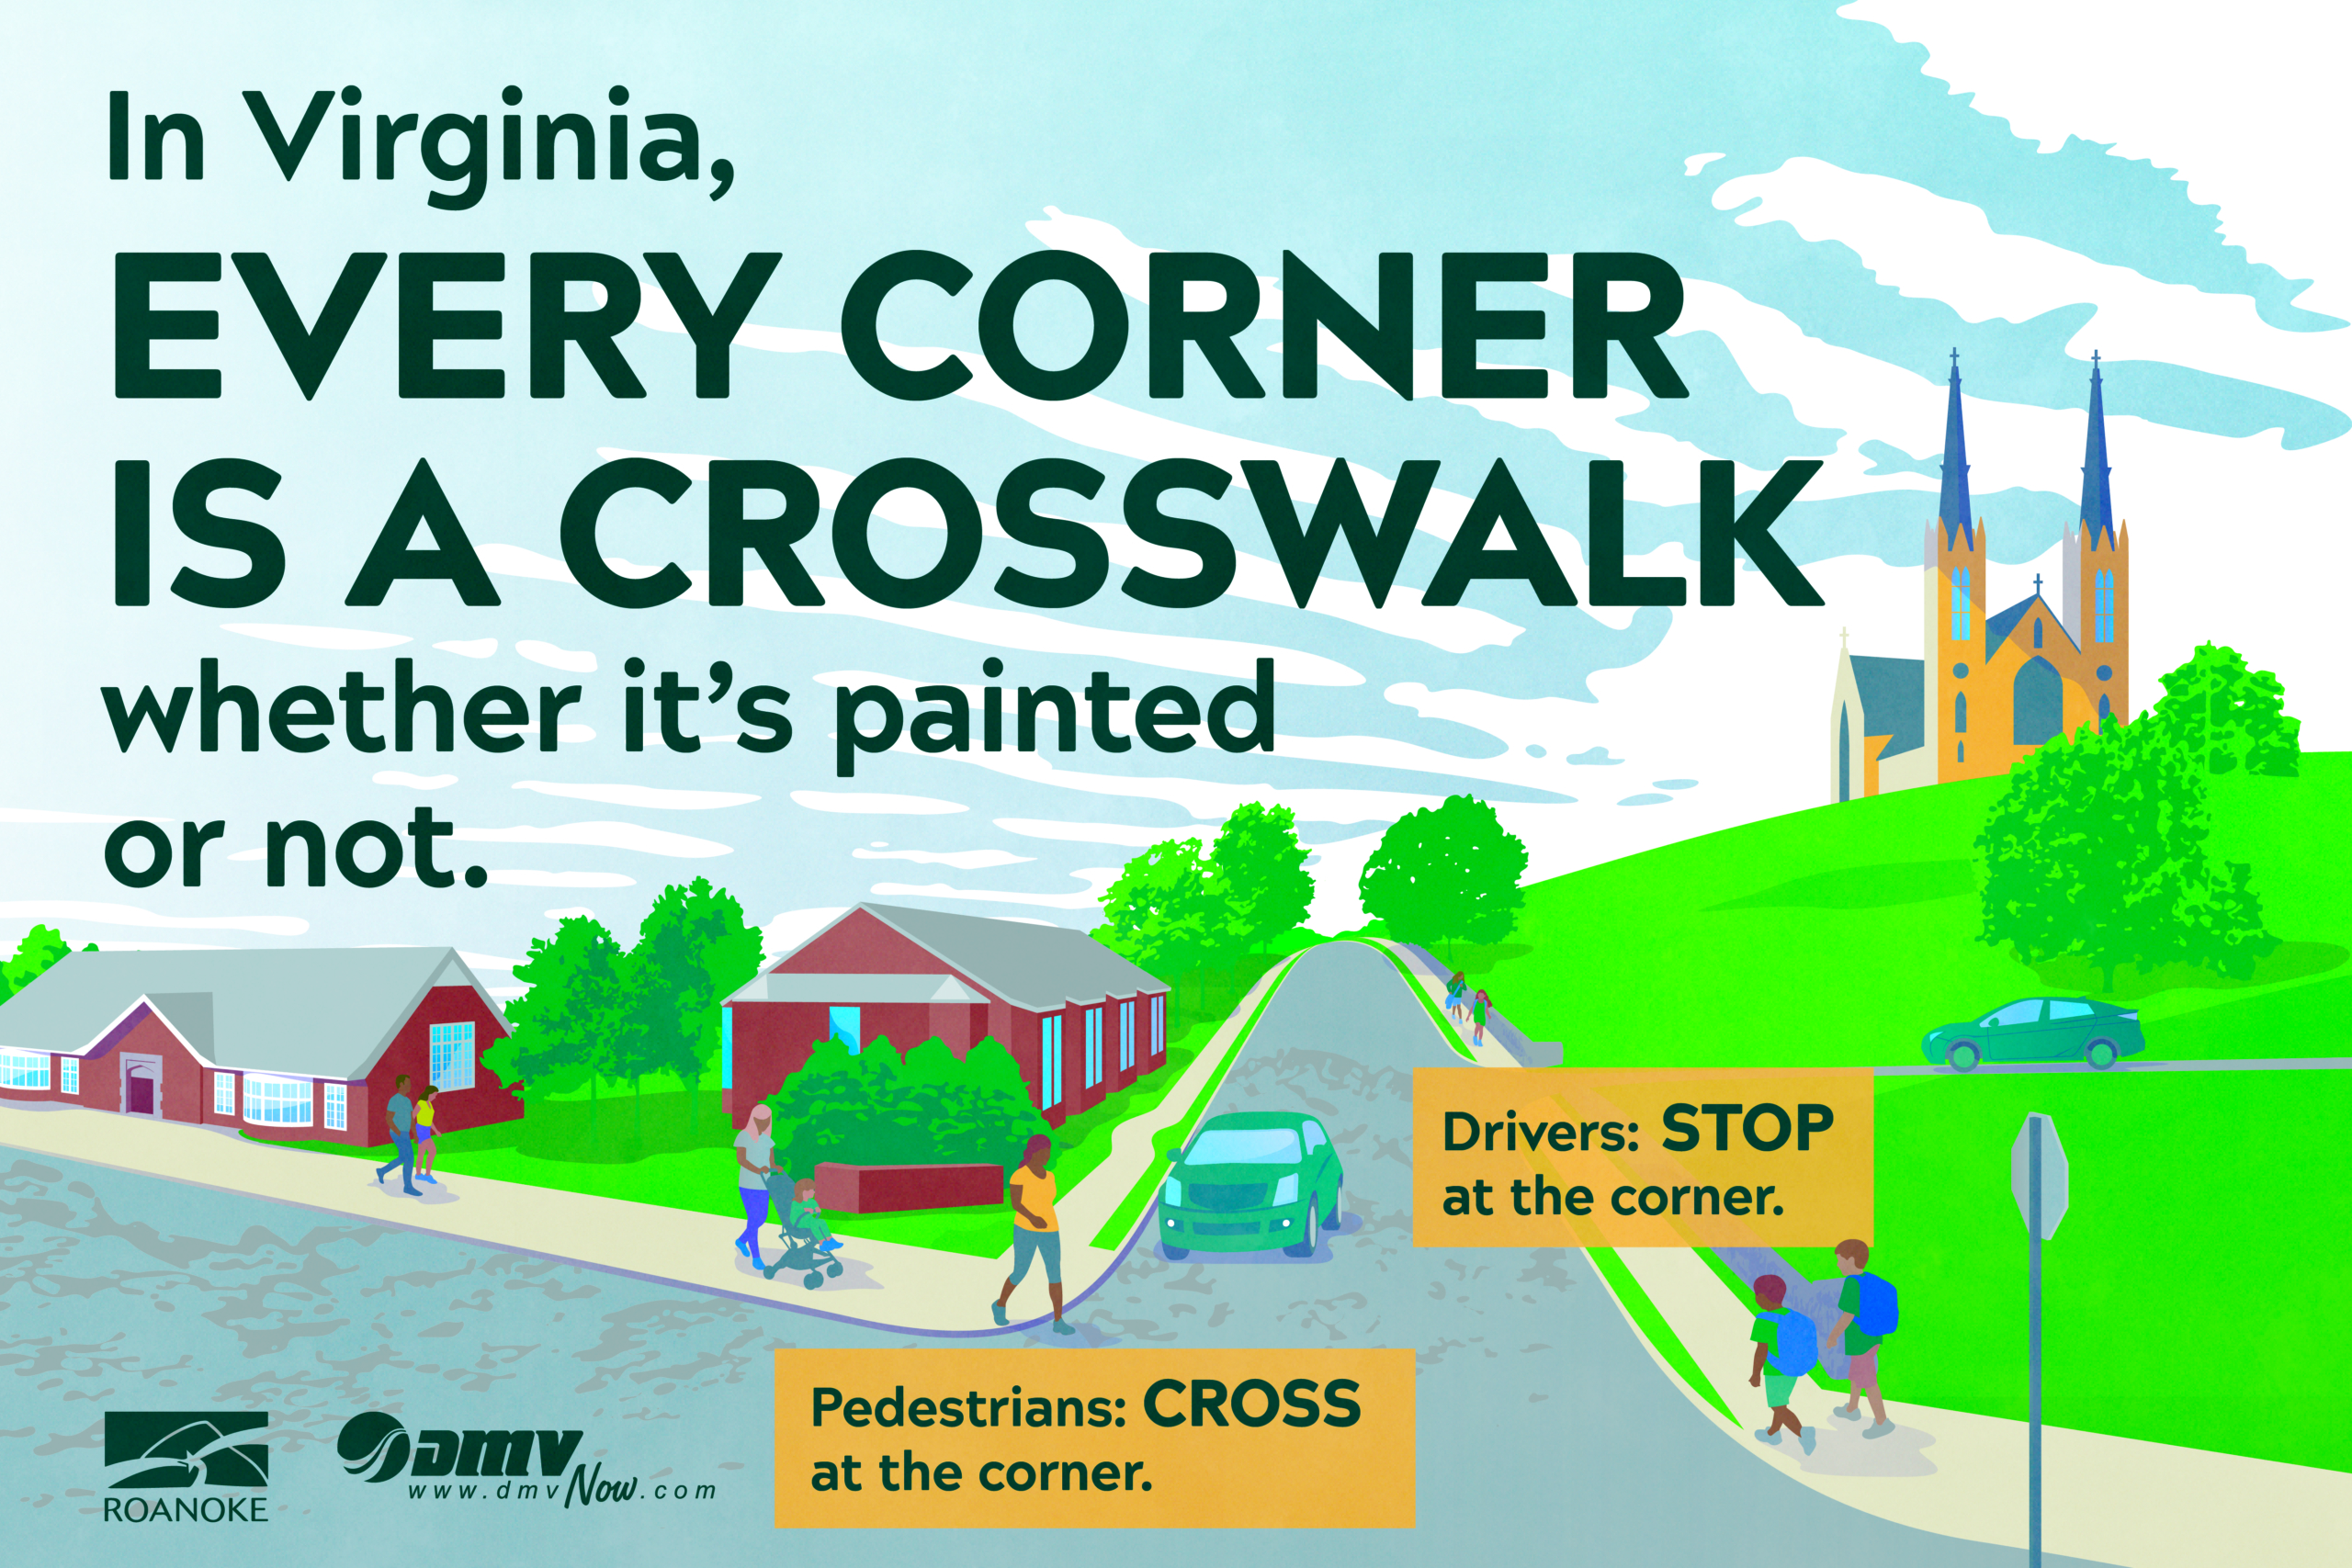 In Virginia, every corner is a crosswalk whether it's painted or not. Drivers: Stop at the corner. Pedestrians: Cross at the corner.